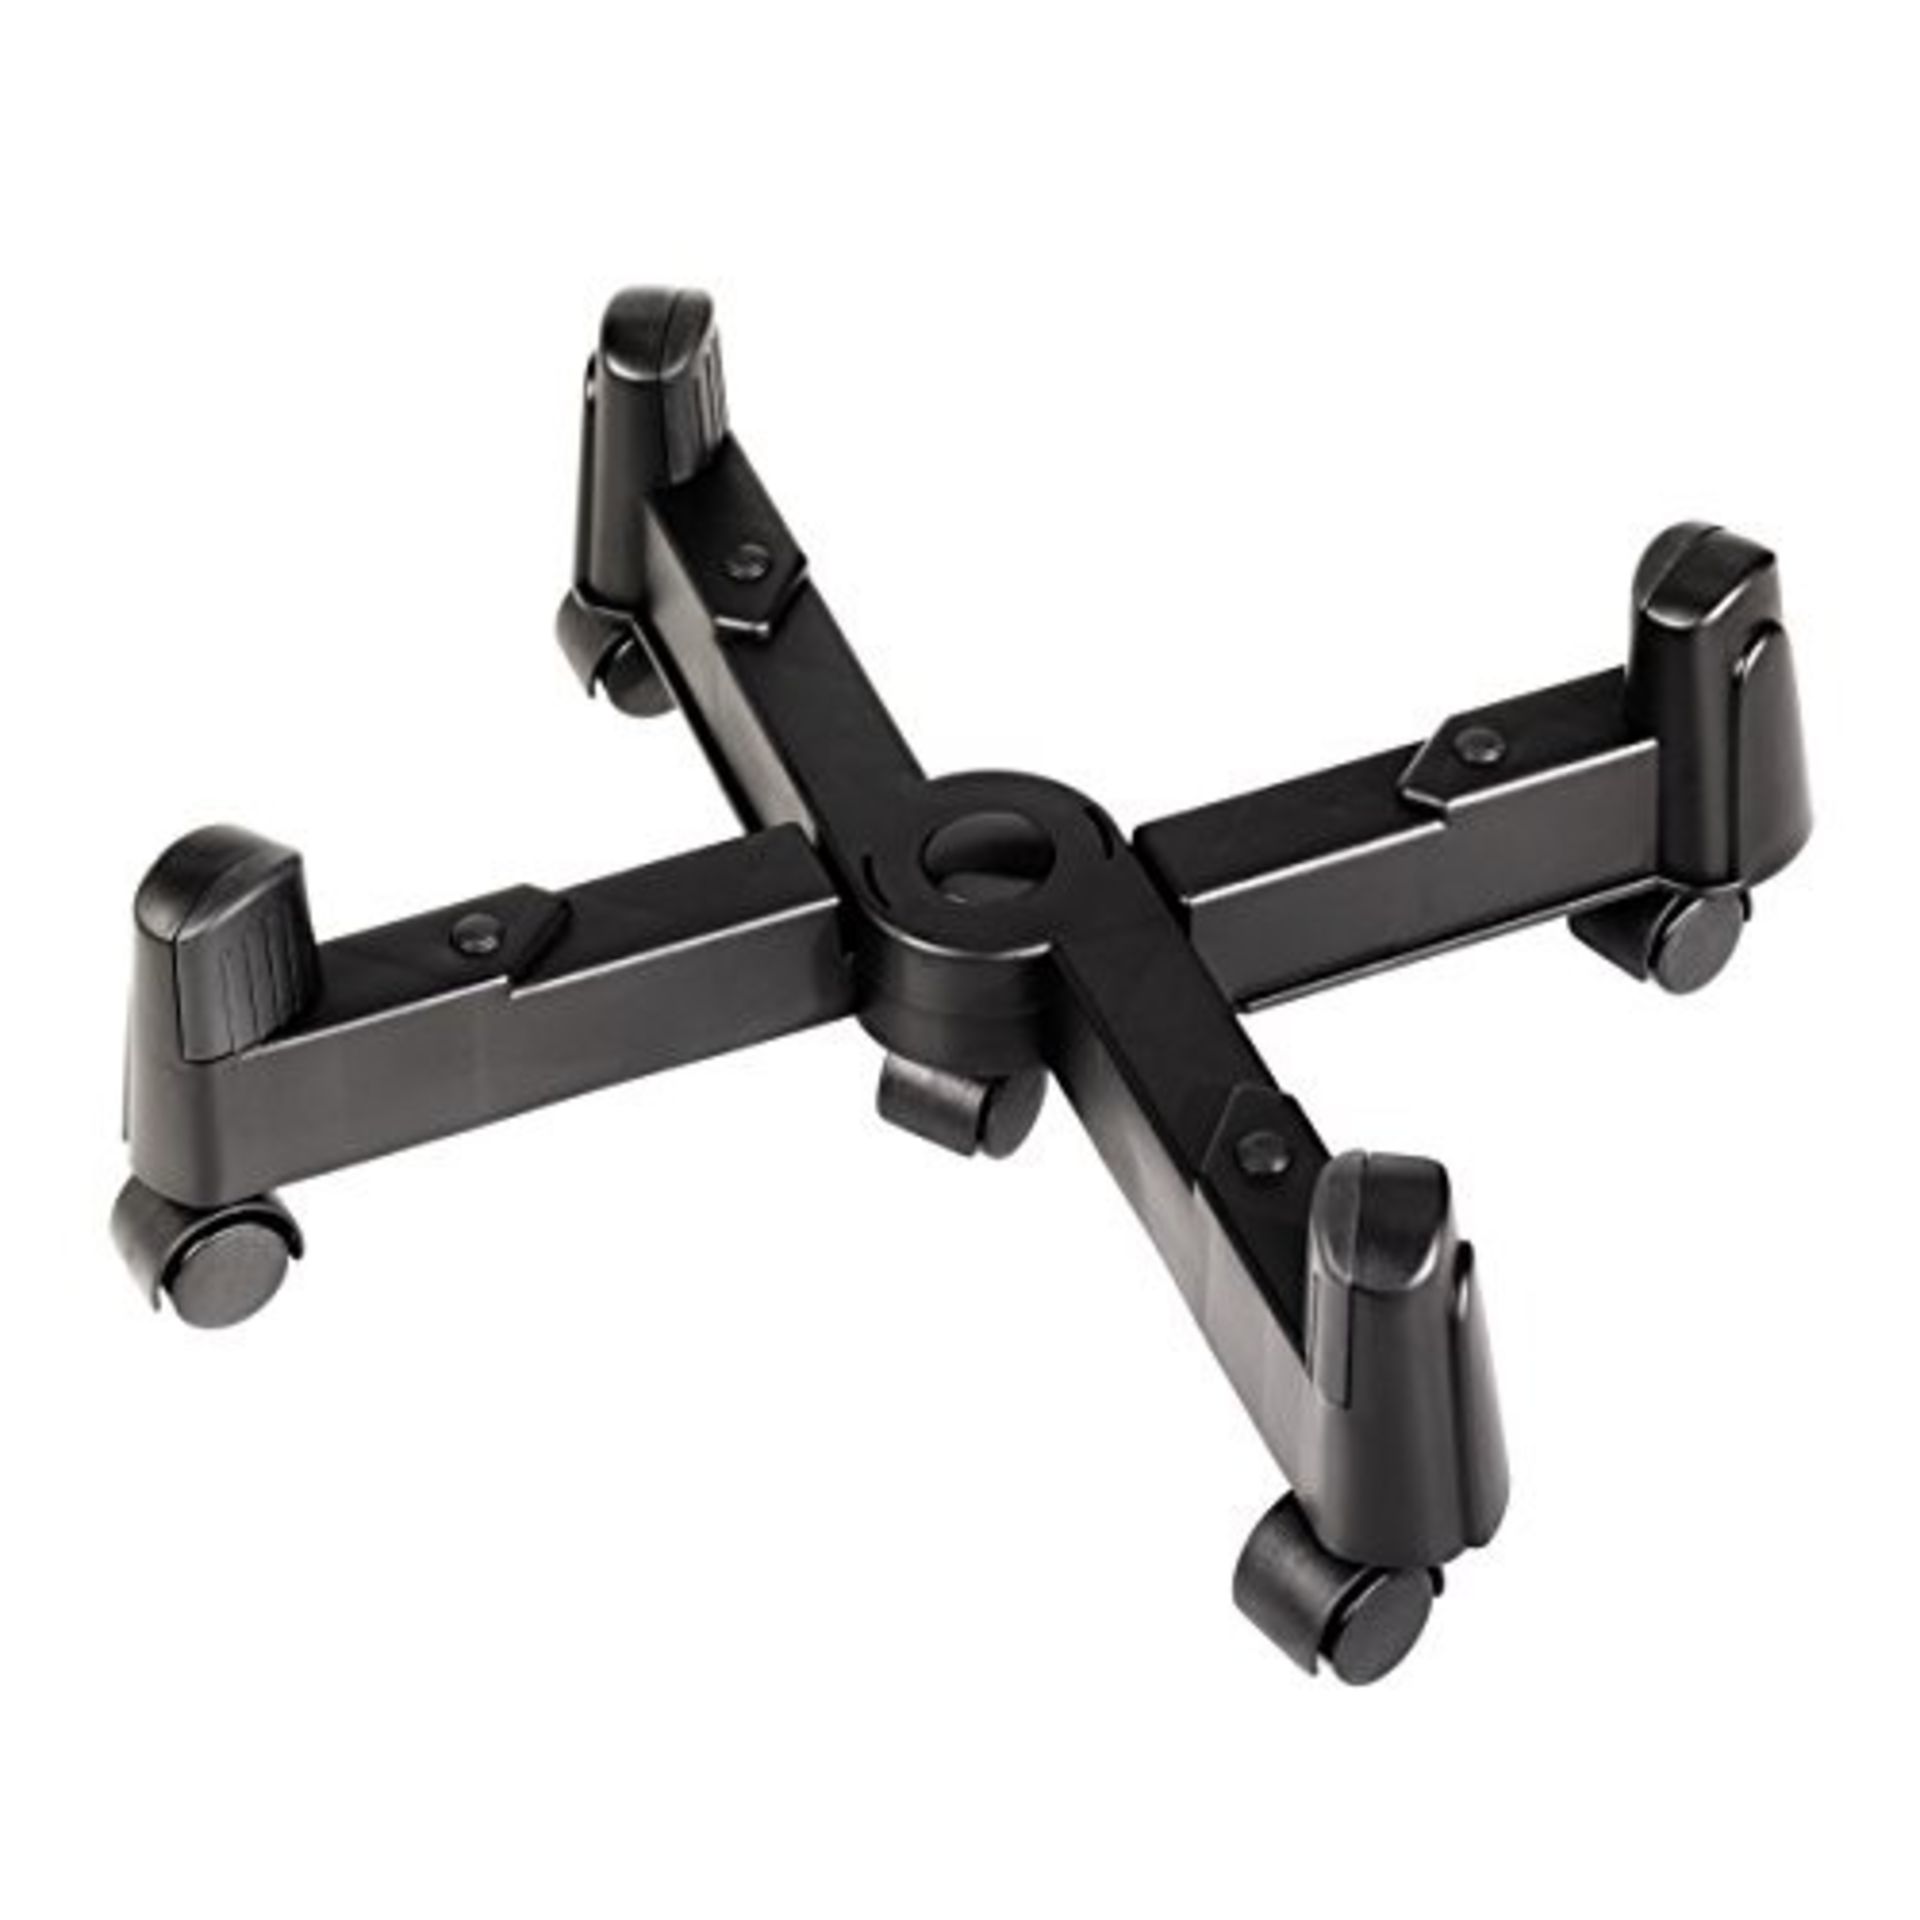 Hama | PC Stand X with Casters | for PC towers up to 25.5 cm wide | Black